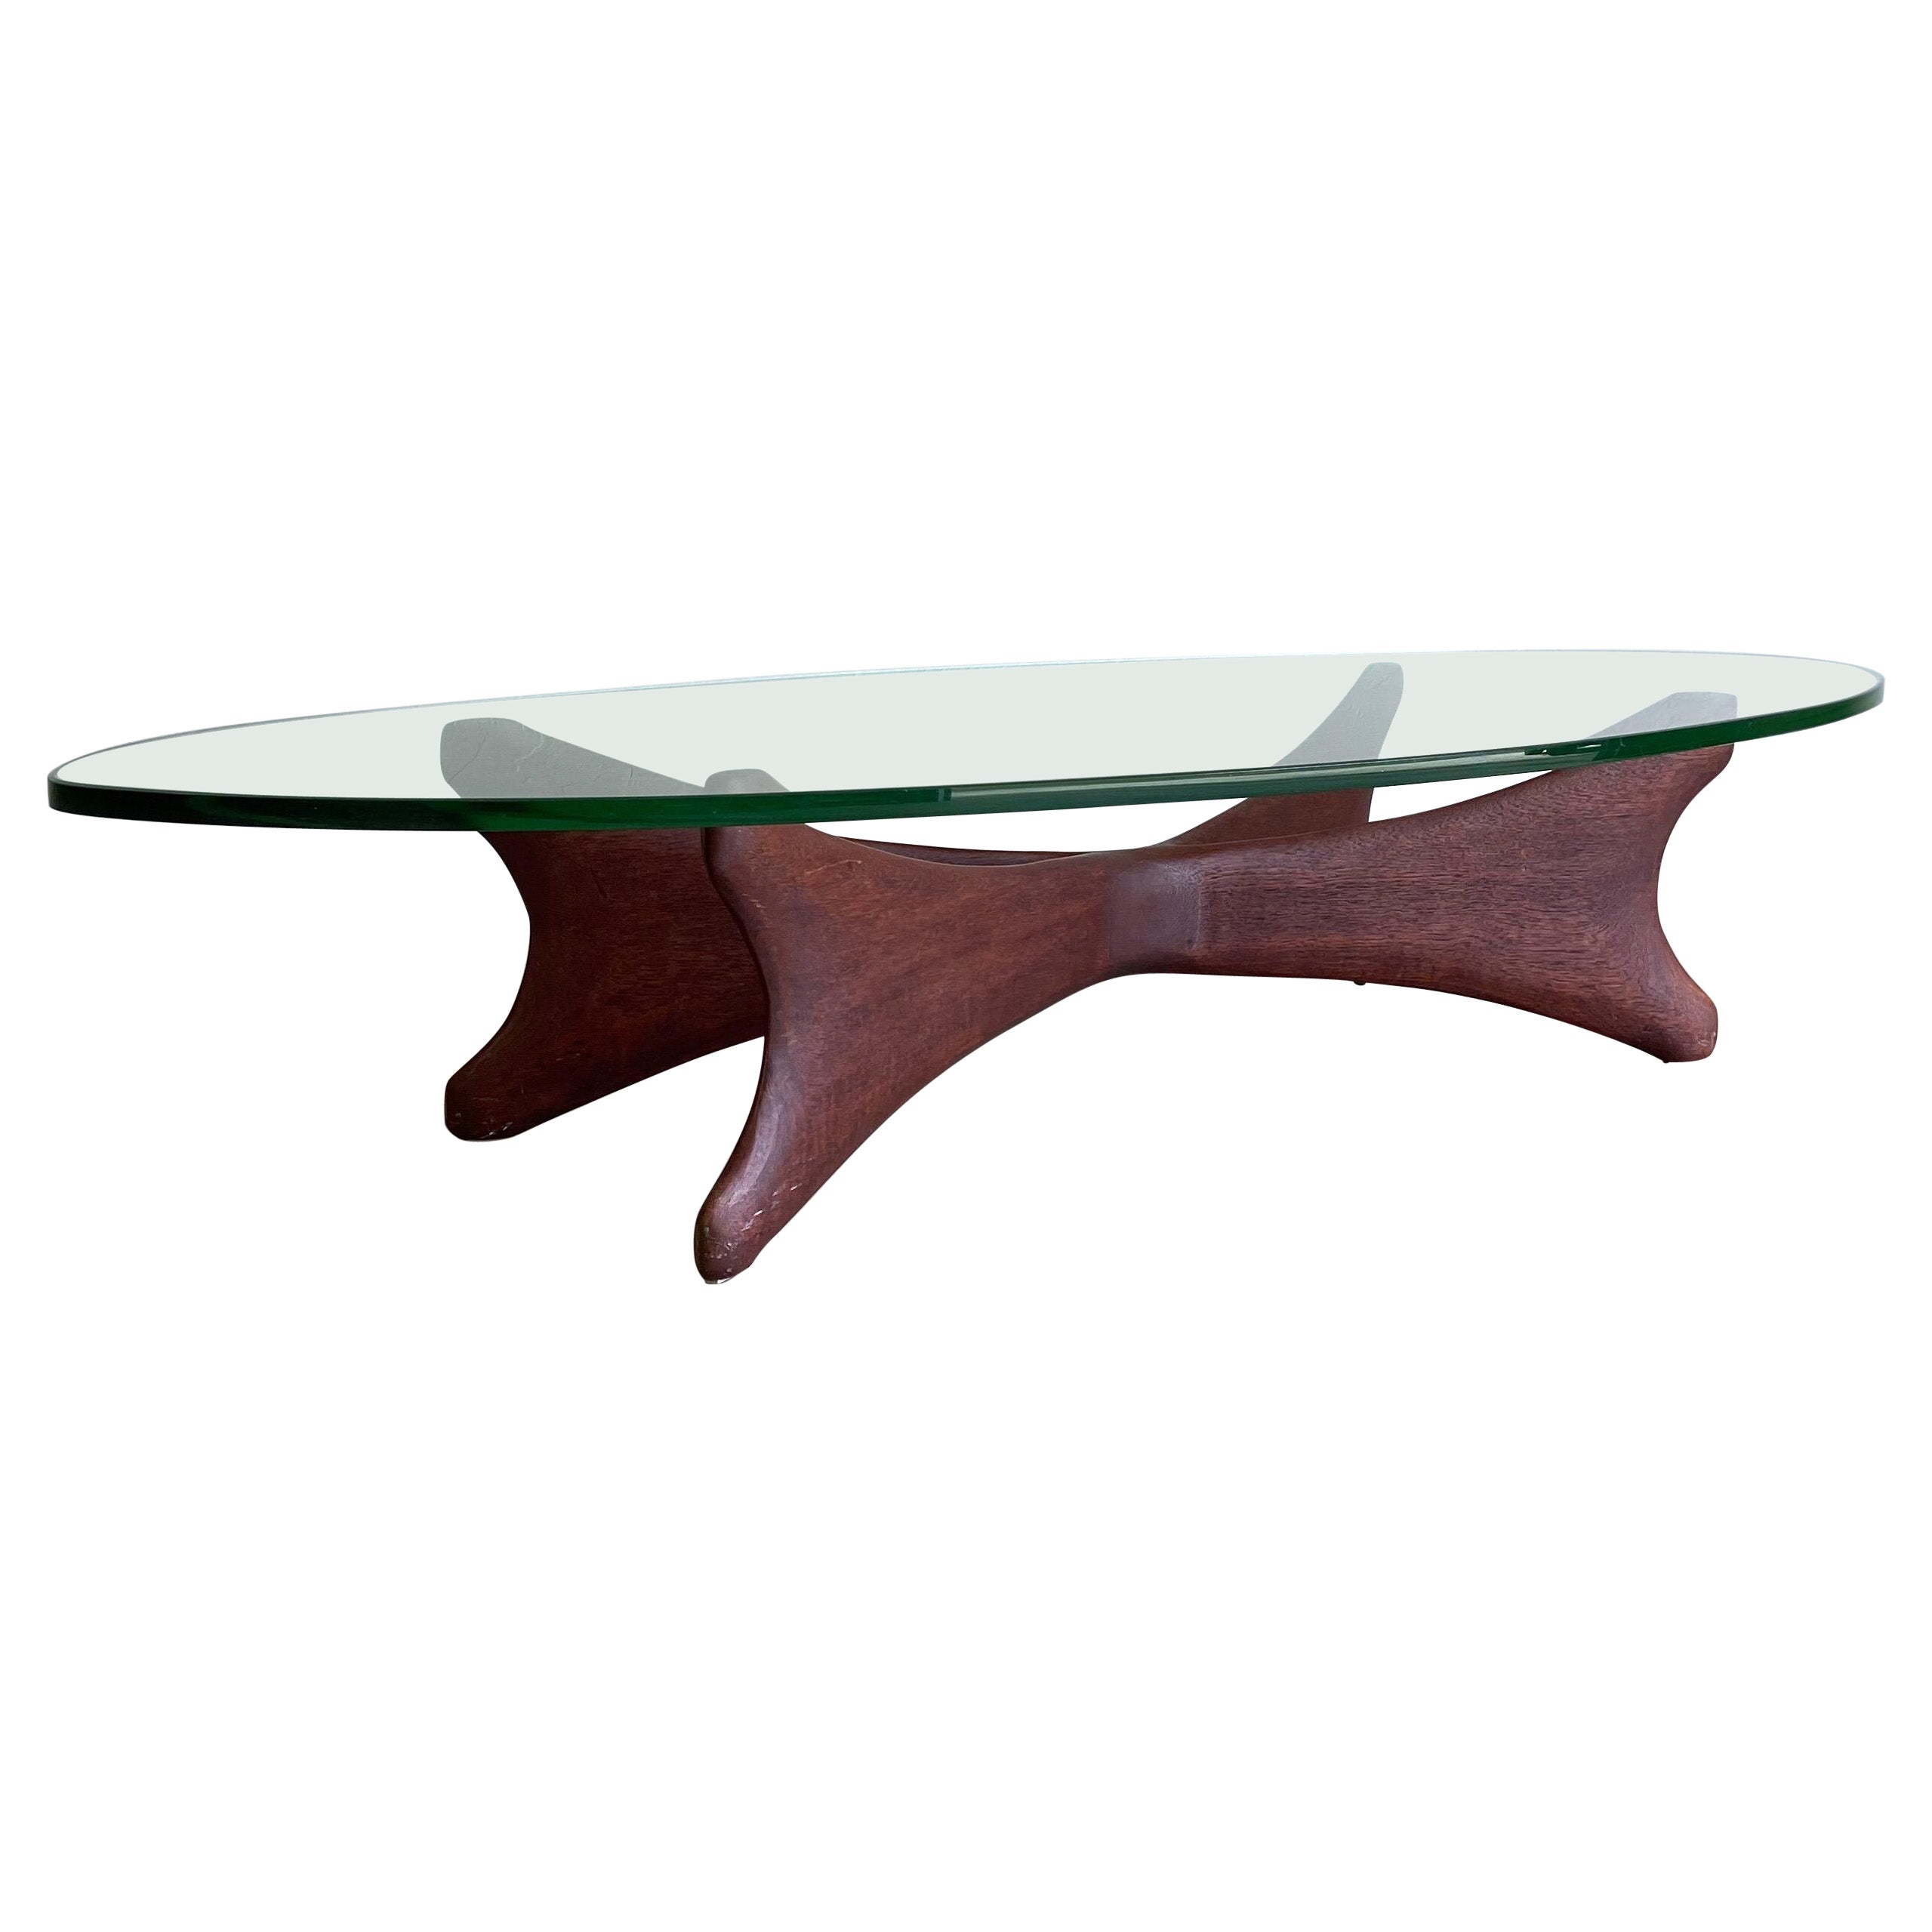 Offered is an incredible, one of kind studio craft coffee table in solid teak. Featuring an organic, sculpted form reminiscent of free-form designs of Noguchi. The table is well-executed and most certainly came from the hands of a skilled